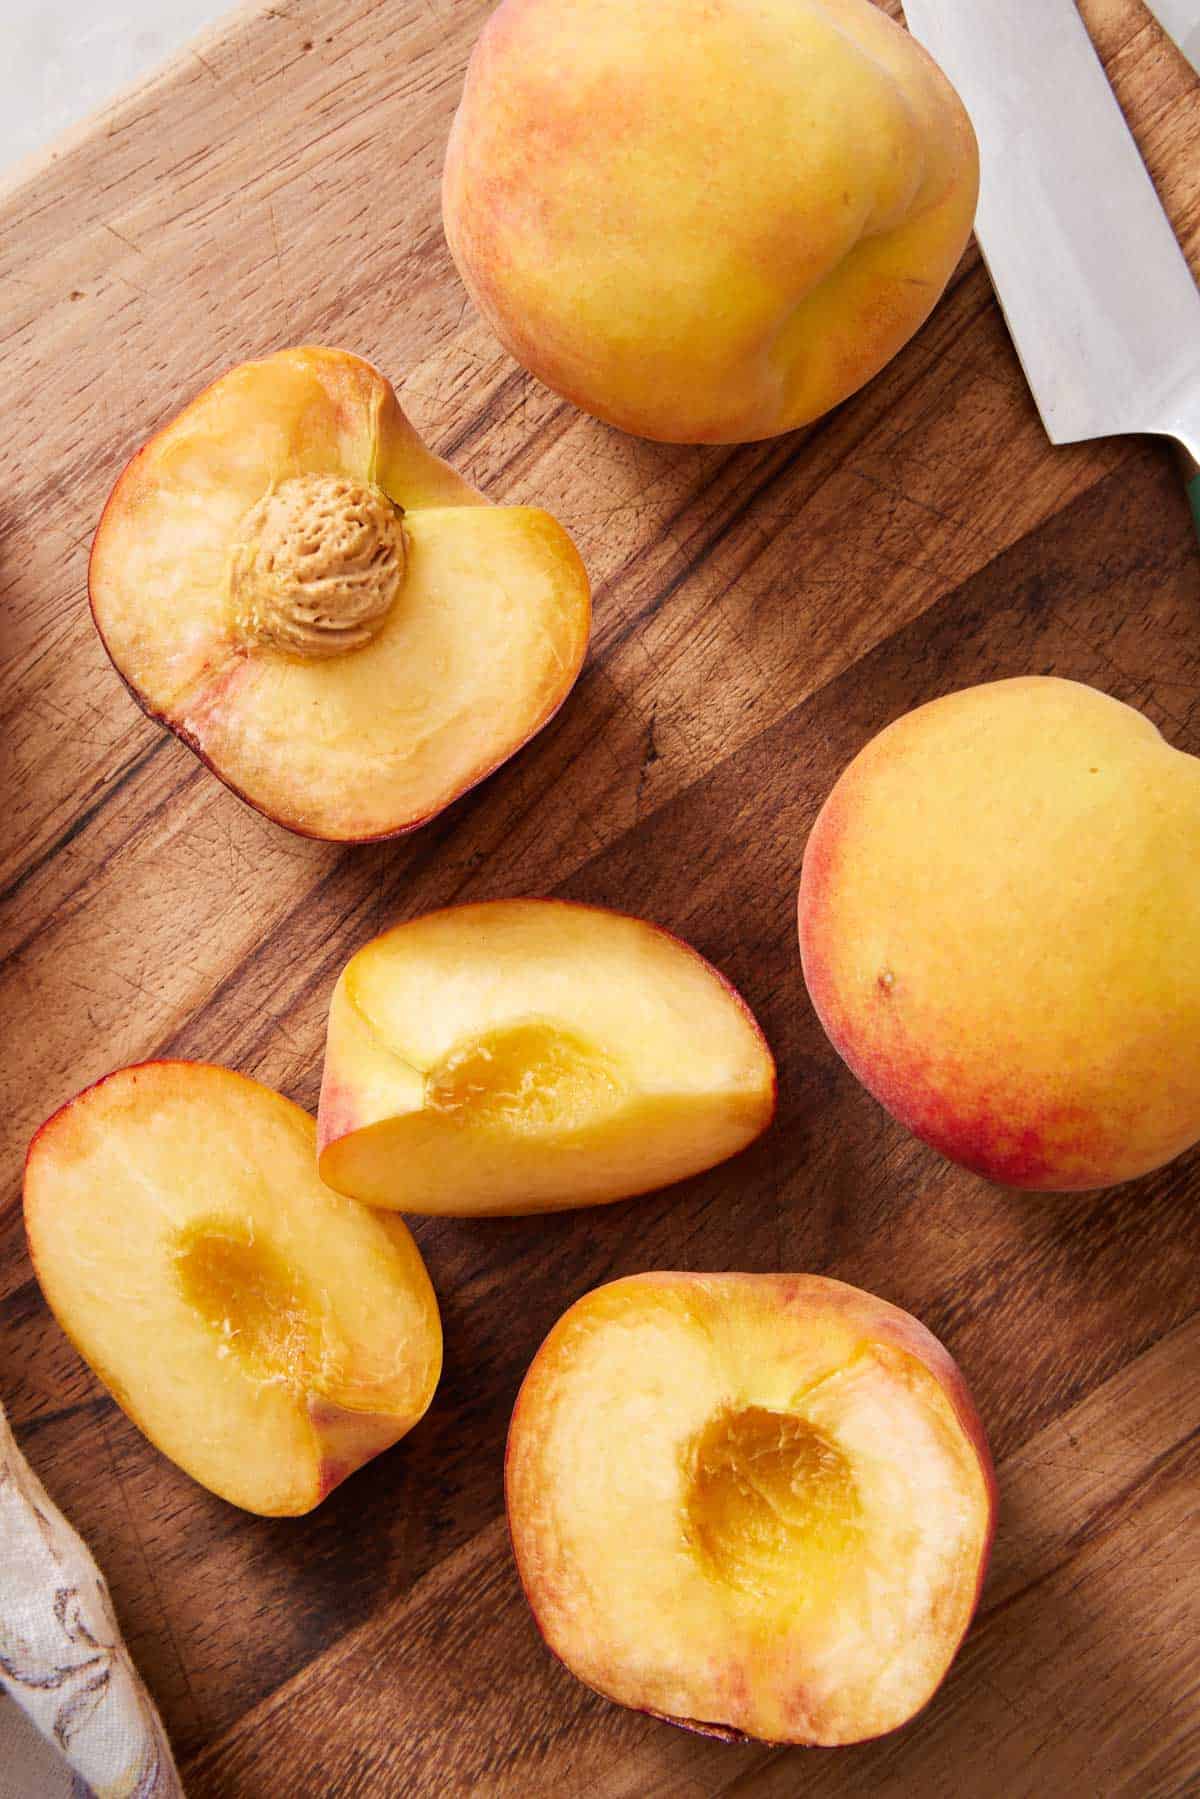 Peaches being cut in half and quarters on a cutting board.